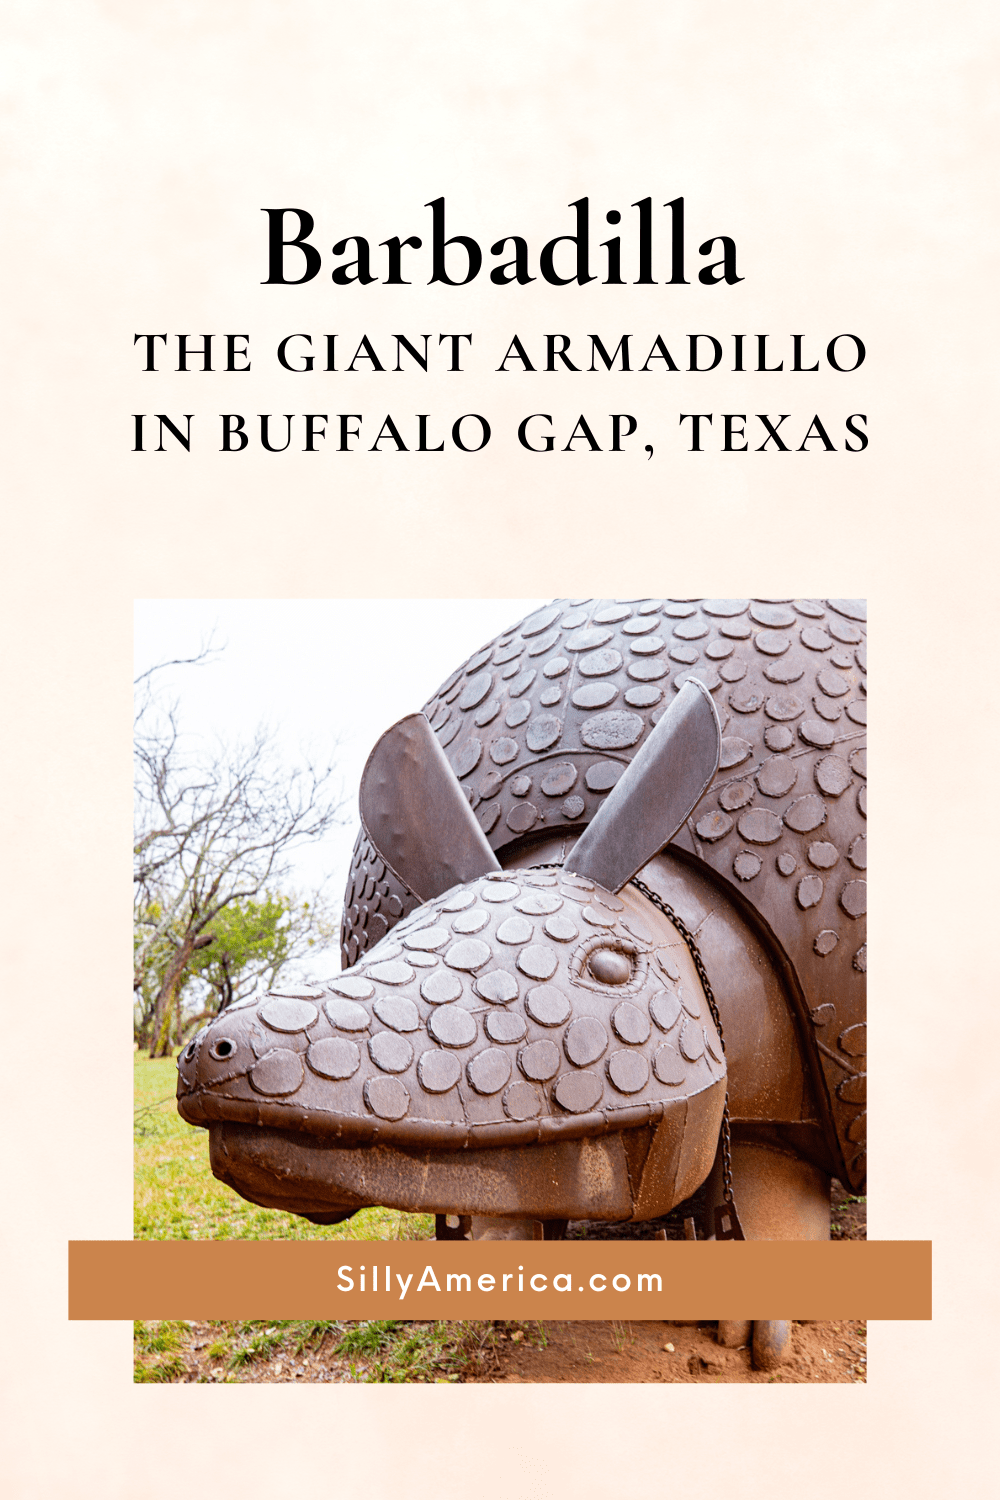 What's the dillo with this Texas roadside attraction? It's Barbadilla: the Giant Armadillo in Buffalo Gap, Texas. Barbadilla is a 30-foot-long metal armadillo sculpture that has stood outside Perini Ranch Steakhouse since 2009. Designed by sculptor Joe Barrington of Red Star Studio in Throckmorton, Texas, Barbadilla is a much-loved attraction that beckons road trippers to stop for a selfie, and a steak. Visit this Texas roadisde attraction on a Texas road trip! #RoadsideAttraction #RoadTrip